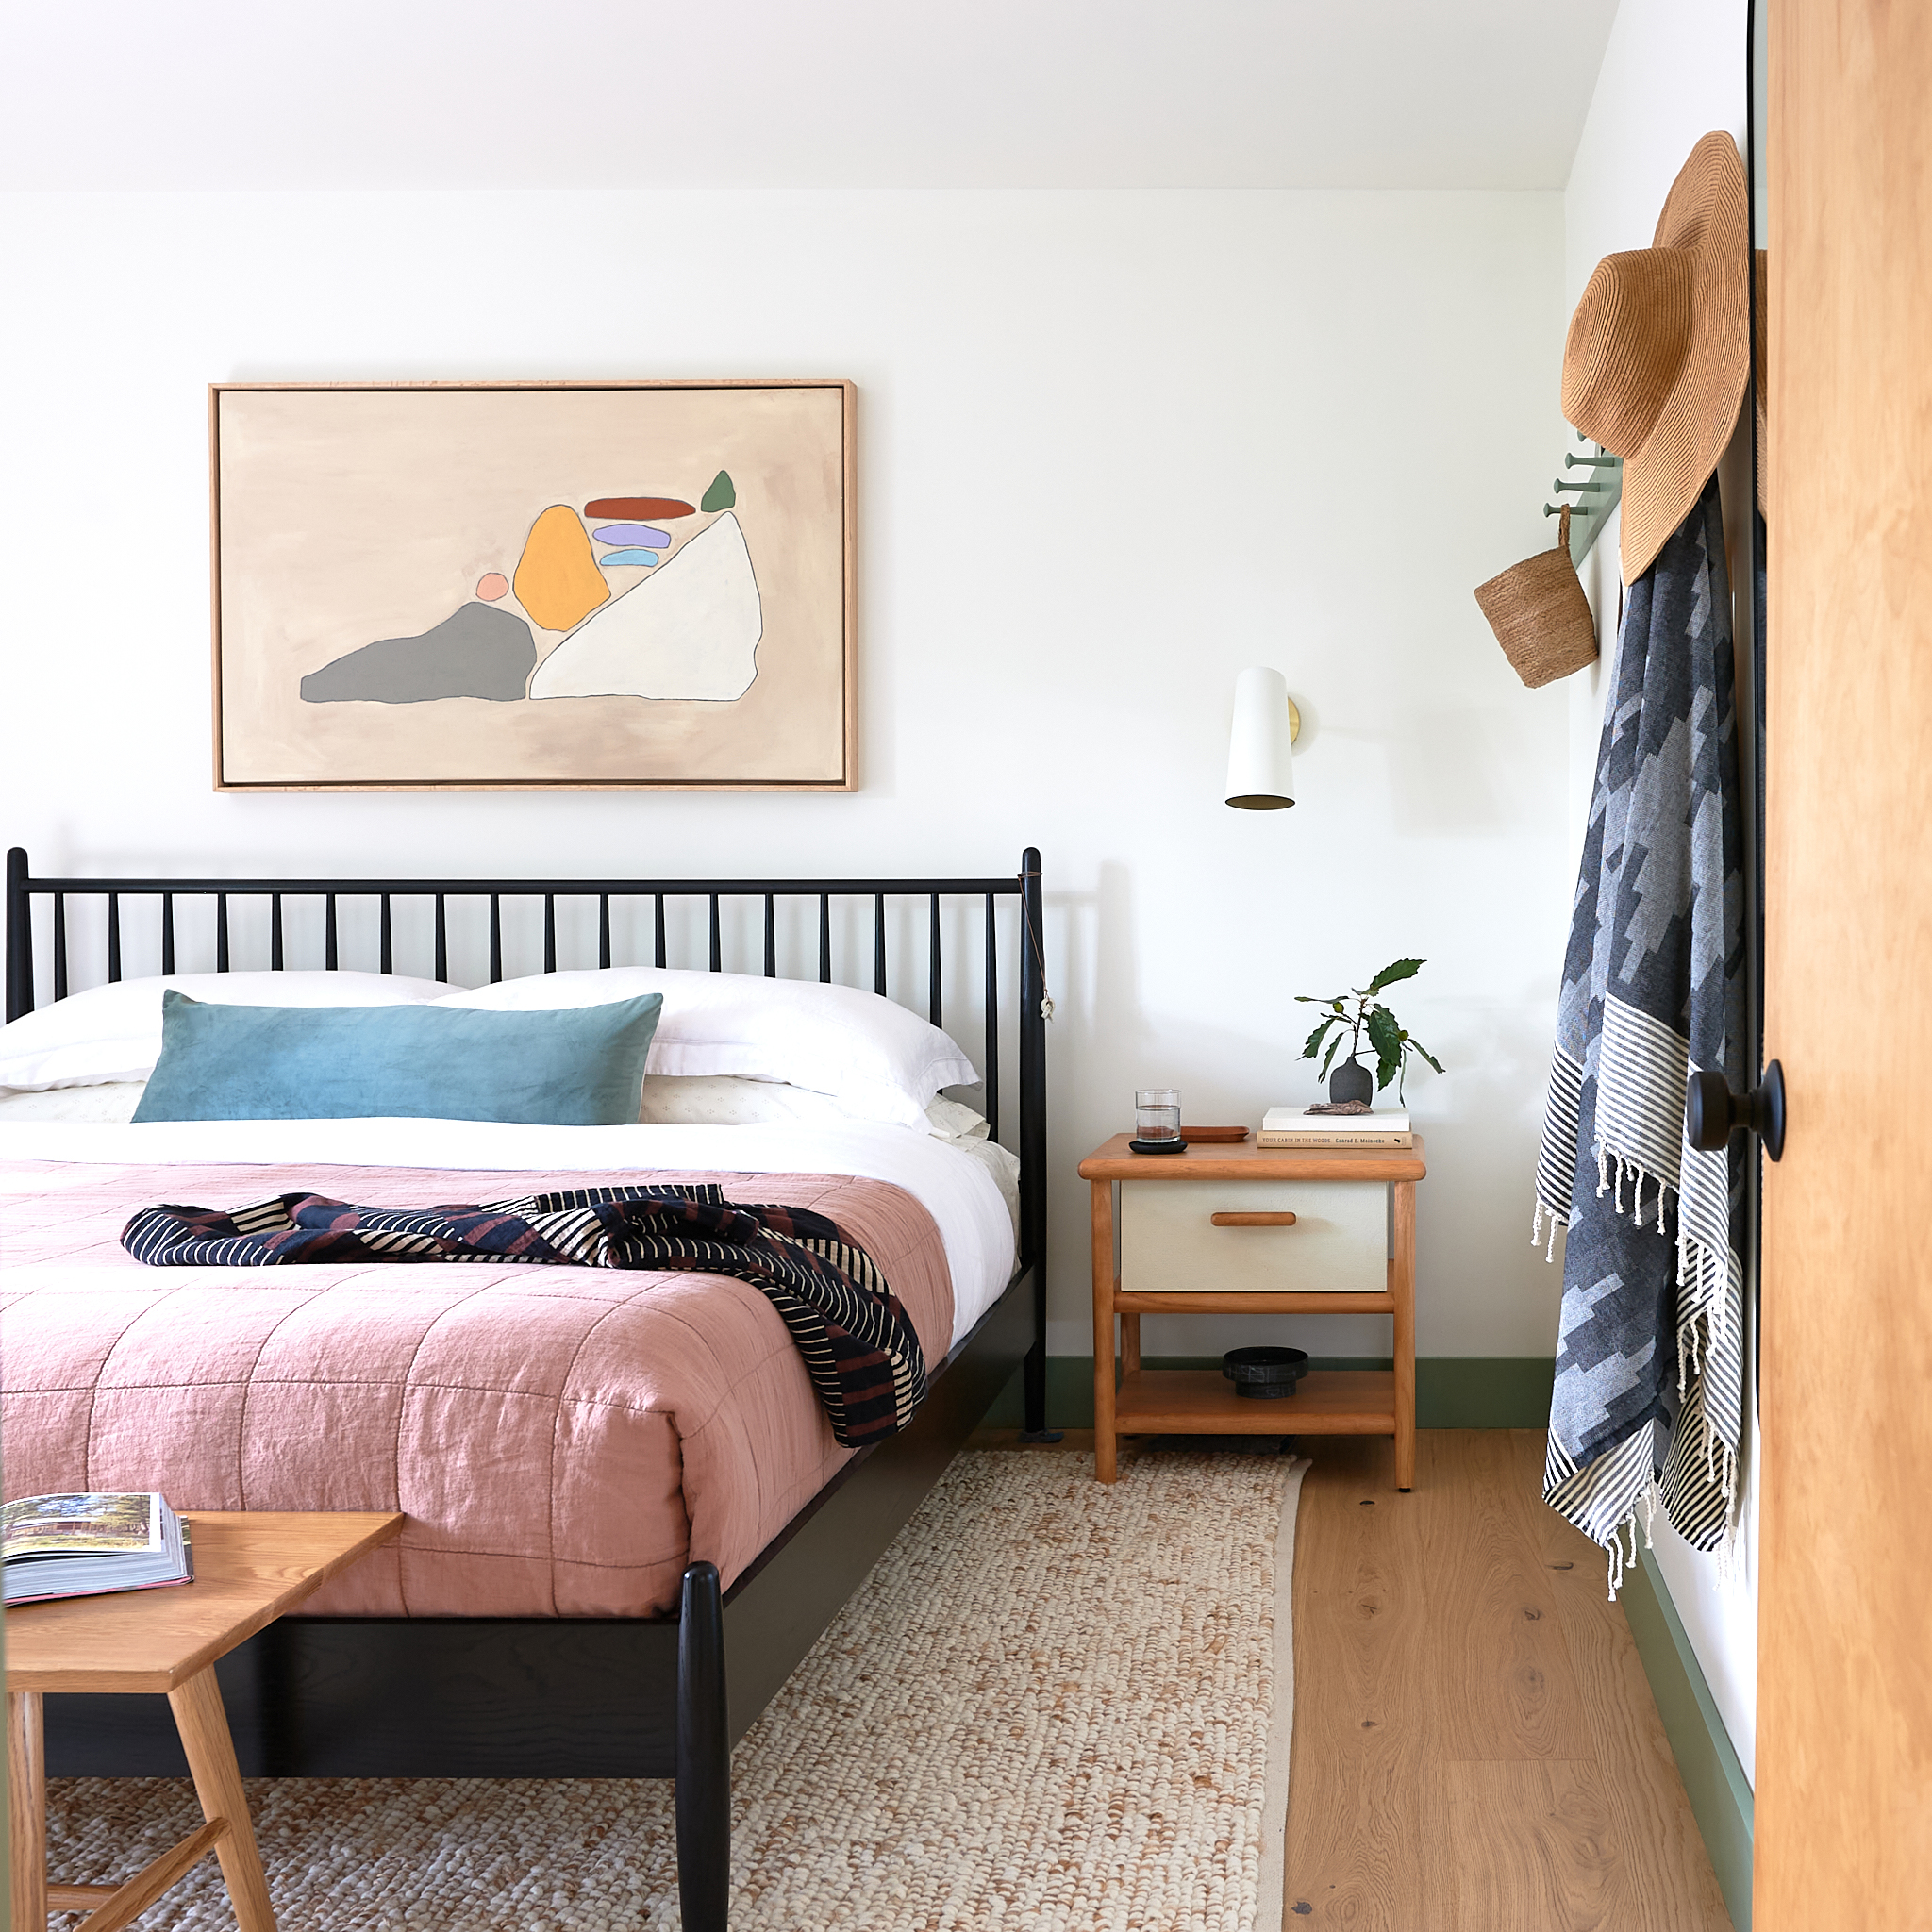 Modern Oak Floors, Spindle bed, and sconce over nightstand